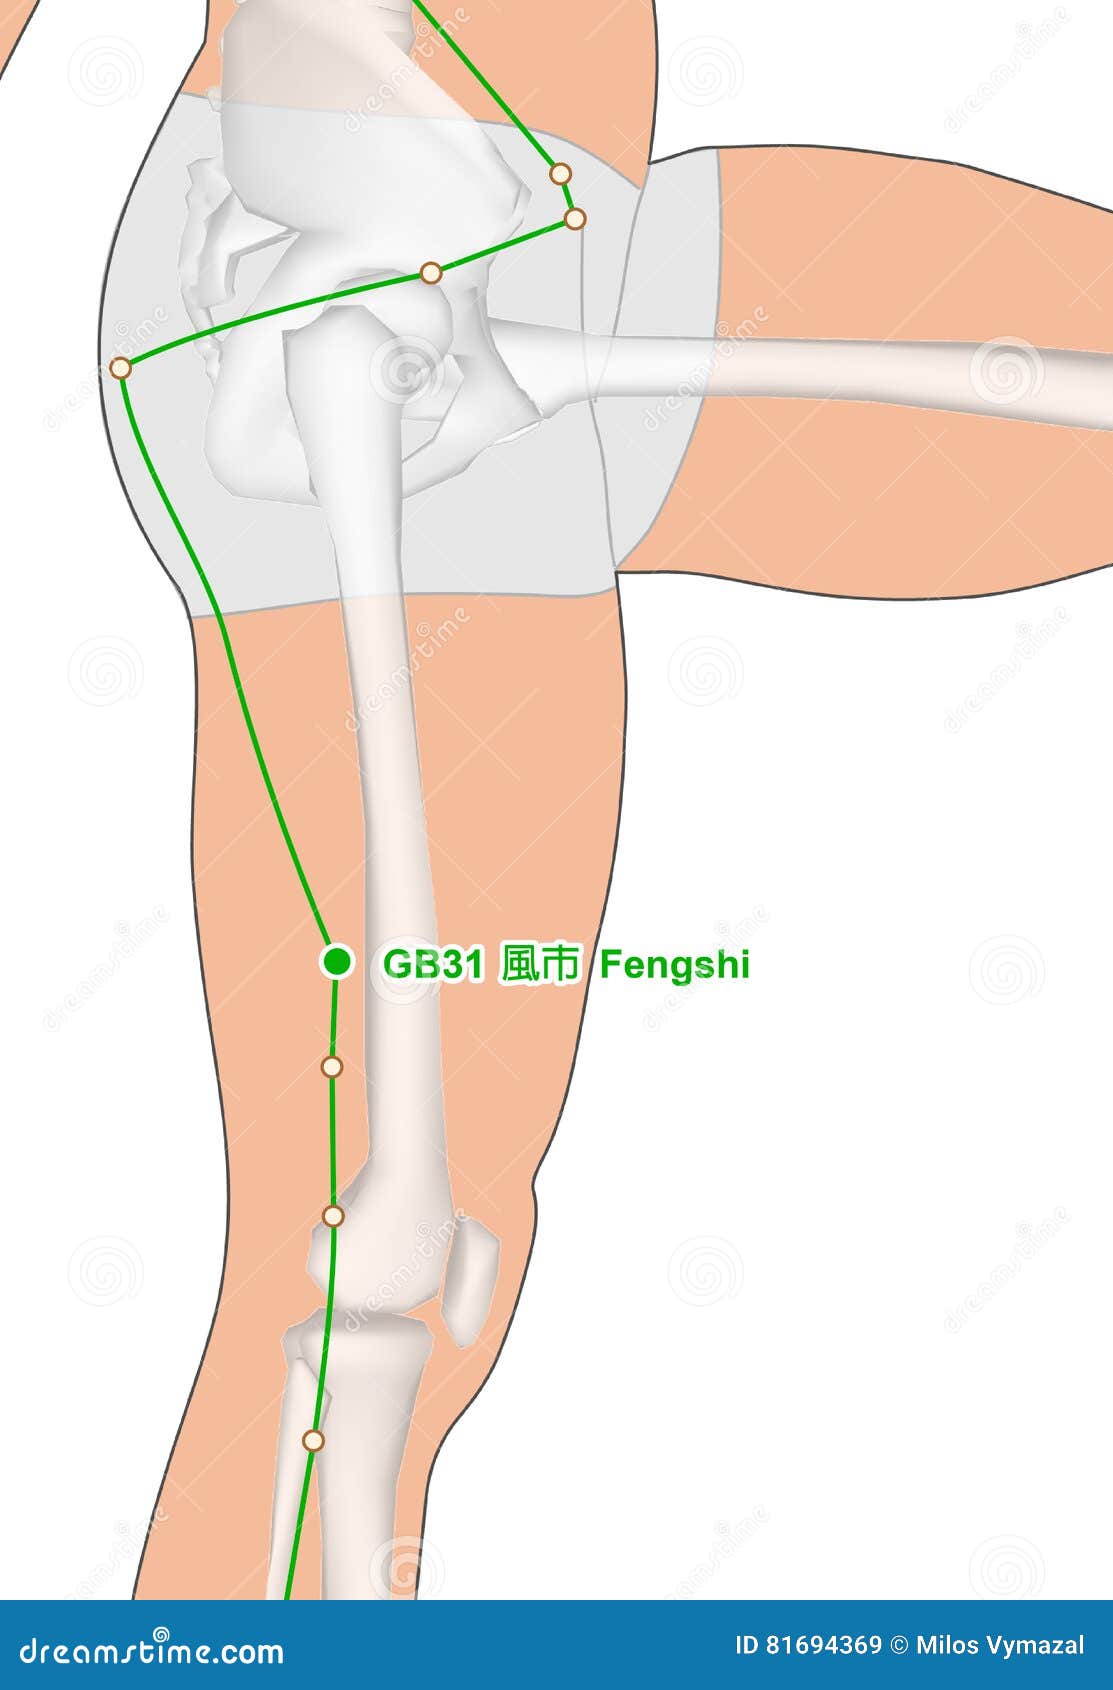 Drawing with Skeleton, Acupuncture Point GB31 Fengshi, Gall Bladder  Meridian, 3D Illustration Stock Illustration - Illustration of medicine,  skeleton: 81694369